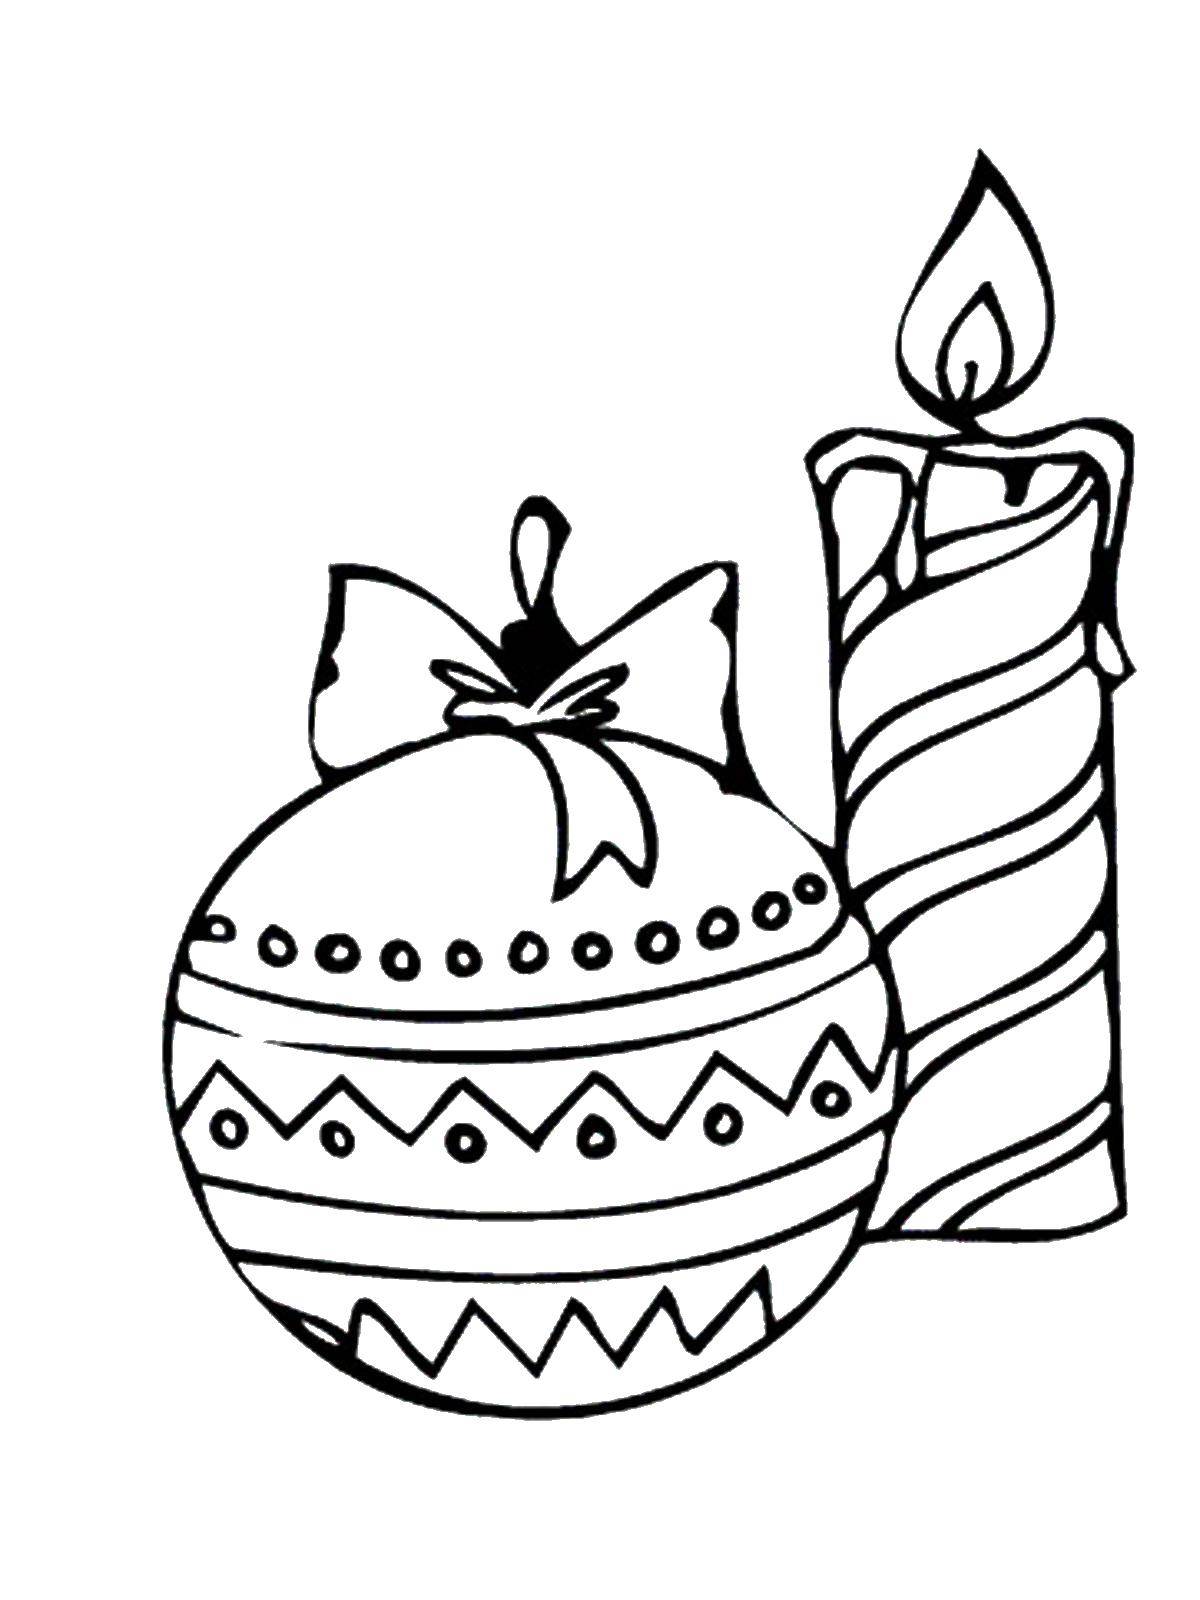 Coloring Candle with Christmas decorations. Category Christmas decorations. Tags:  New Year, Christmas toy.